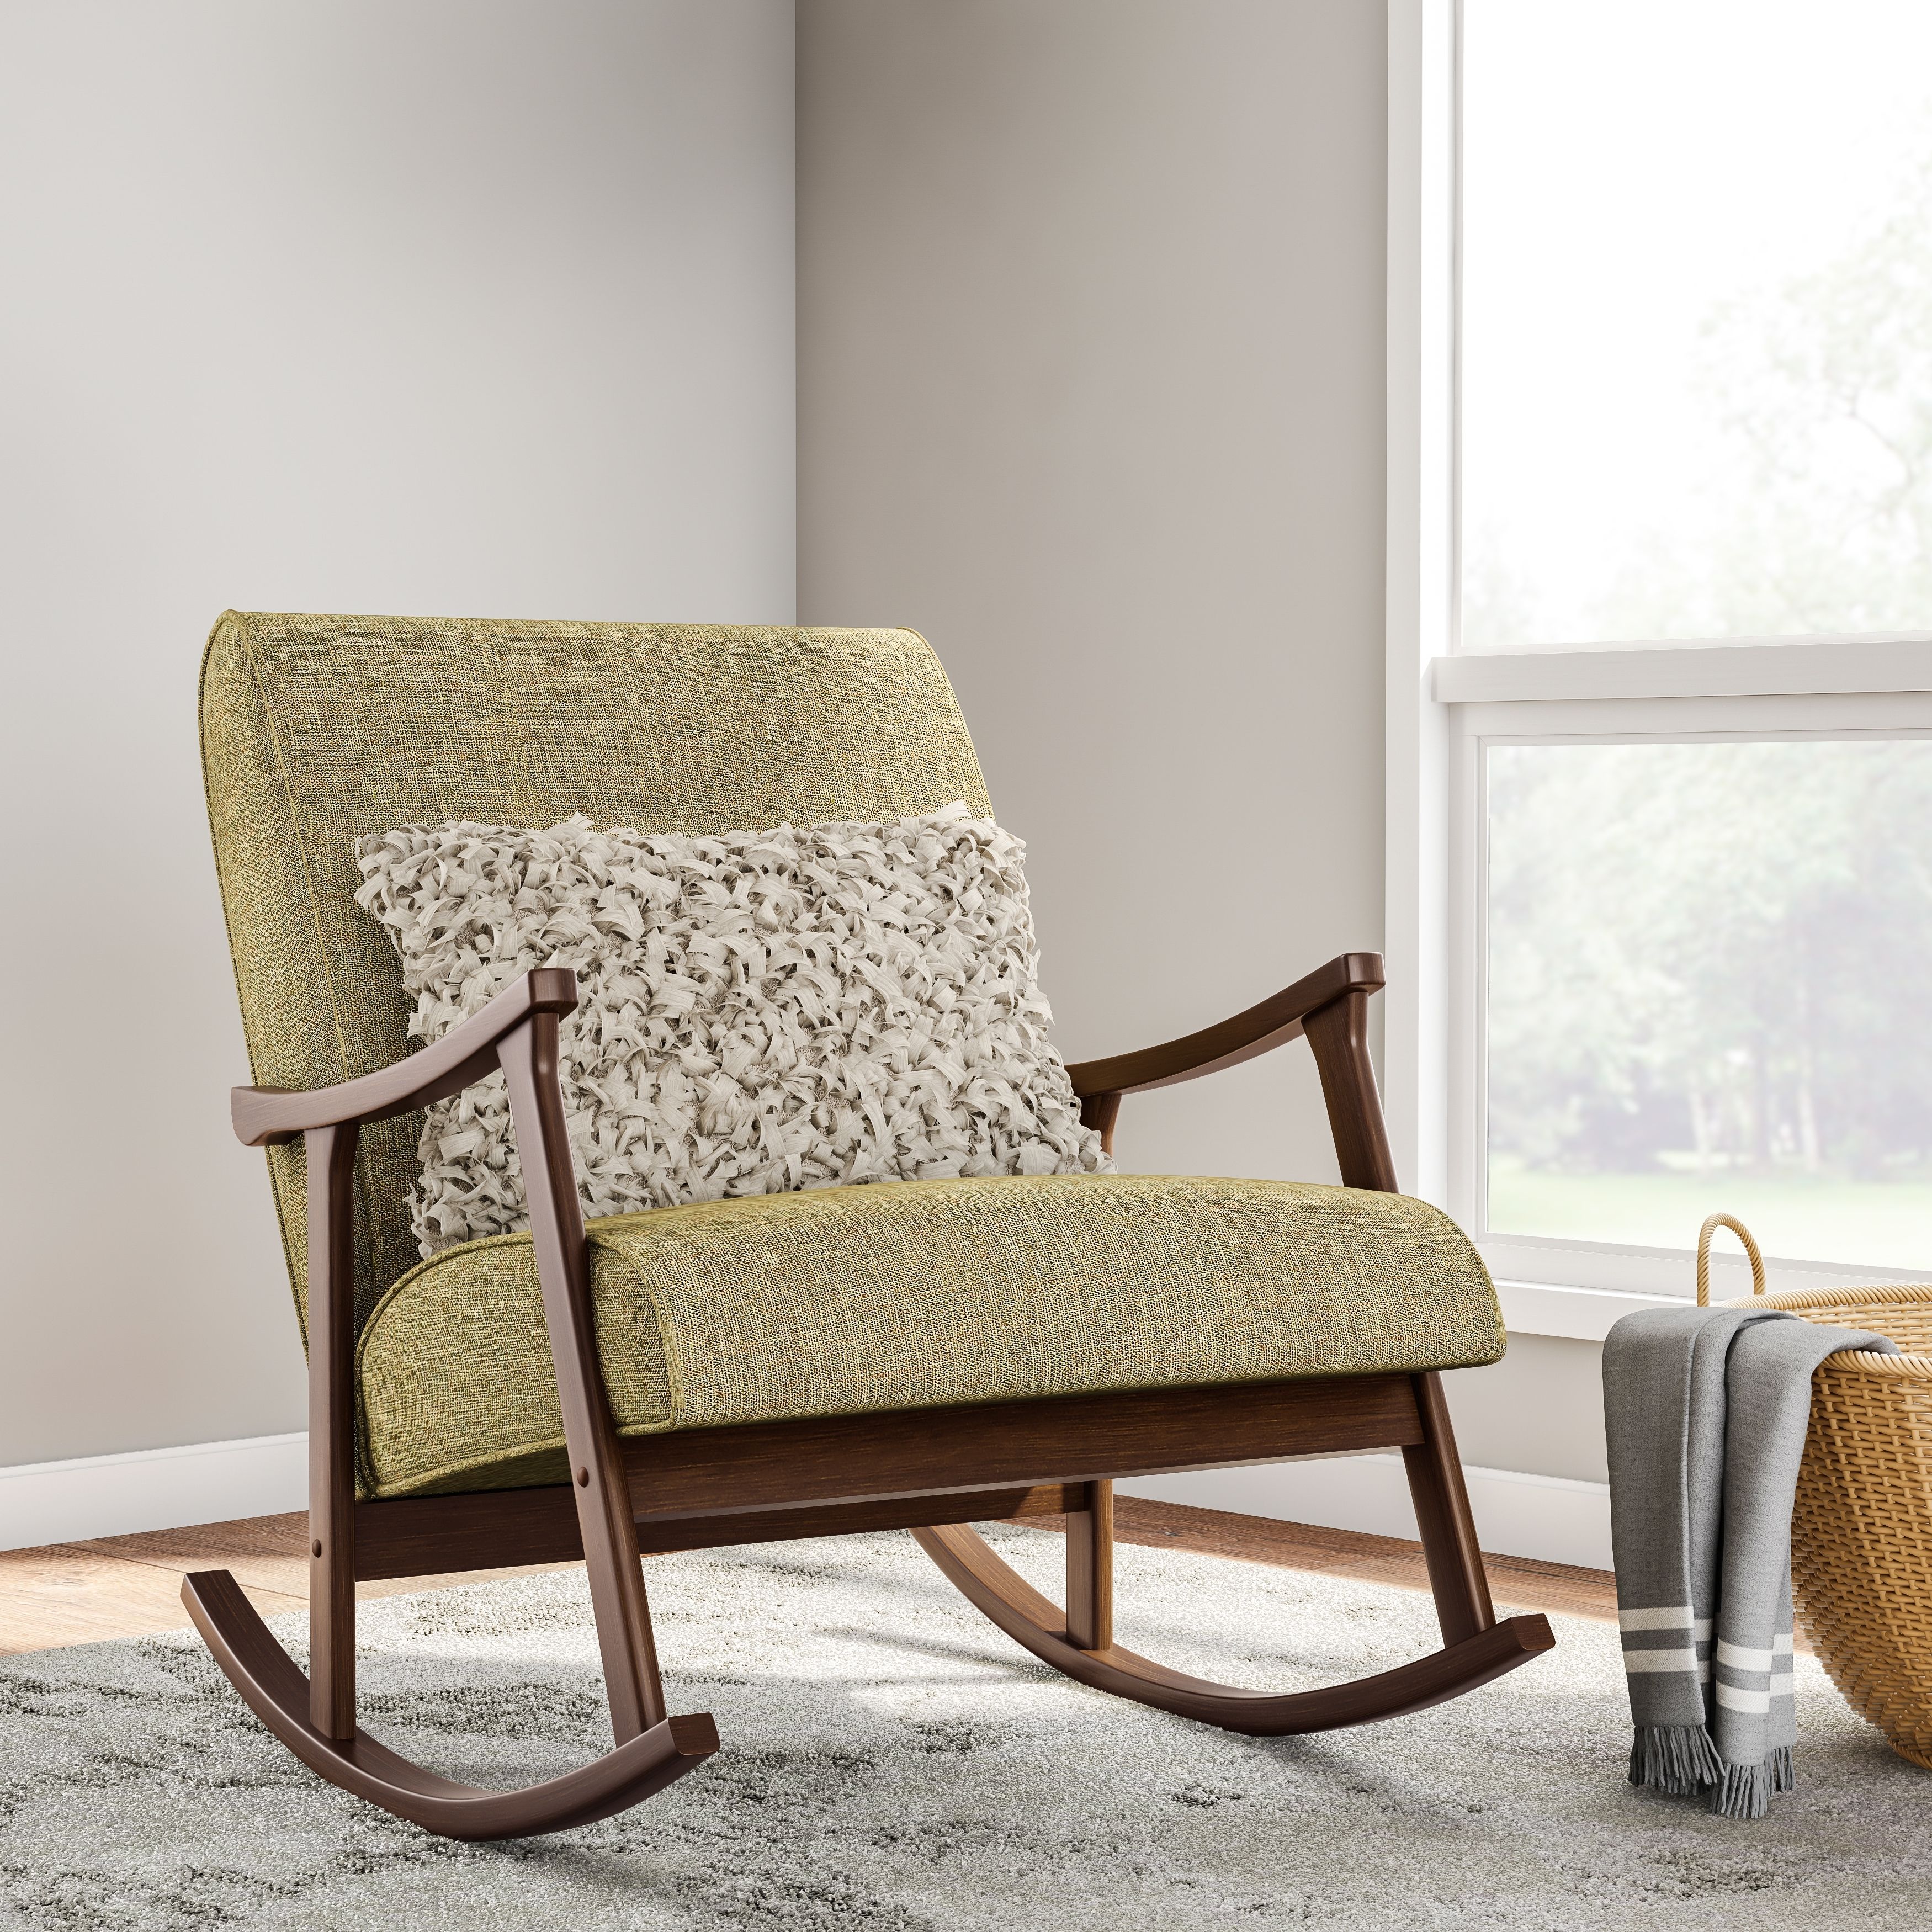 Rocking Chairs For Adults Regarding Best And Newest Buy Rocking Chairs Living Room Chairs Online At Overstock (View 6 of 15)